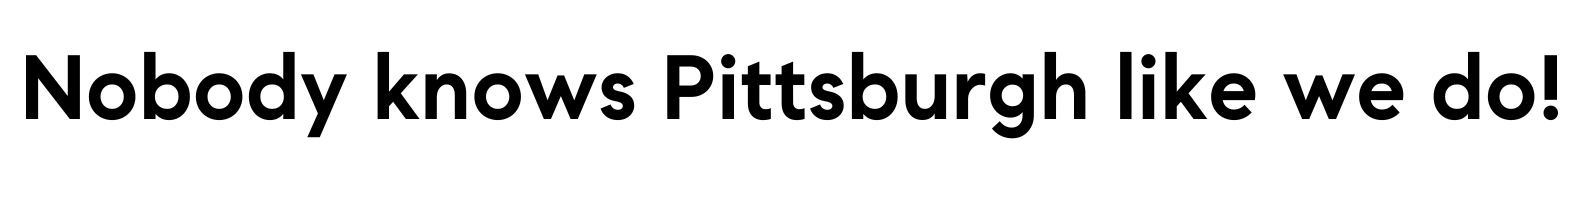 A text banner showcasing Pittsburgh